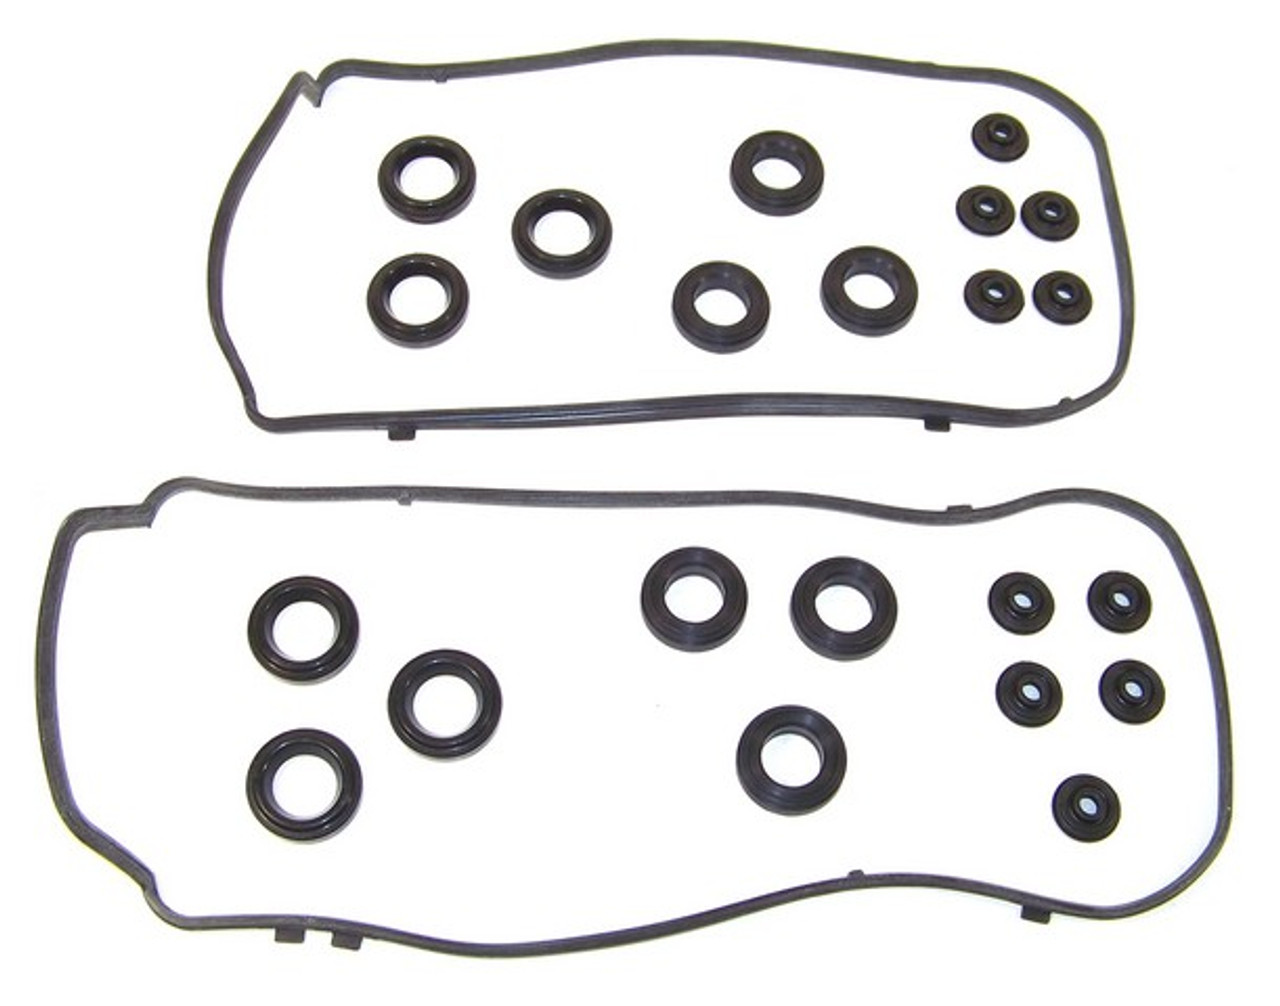 Valve Cover Gasket Set 3.5L 2011 Acura TL - VC268G.18